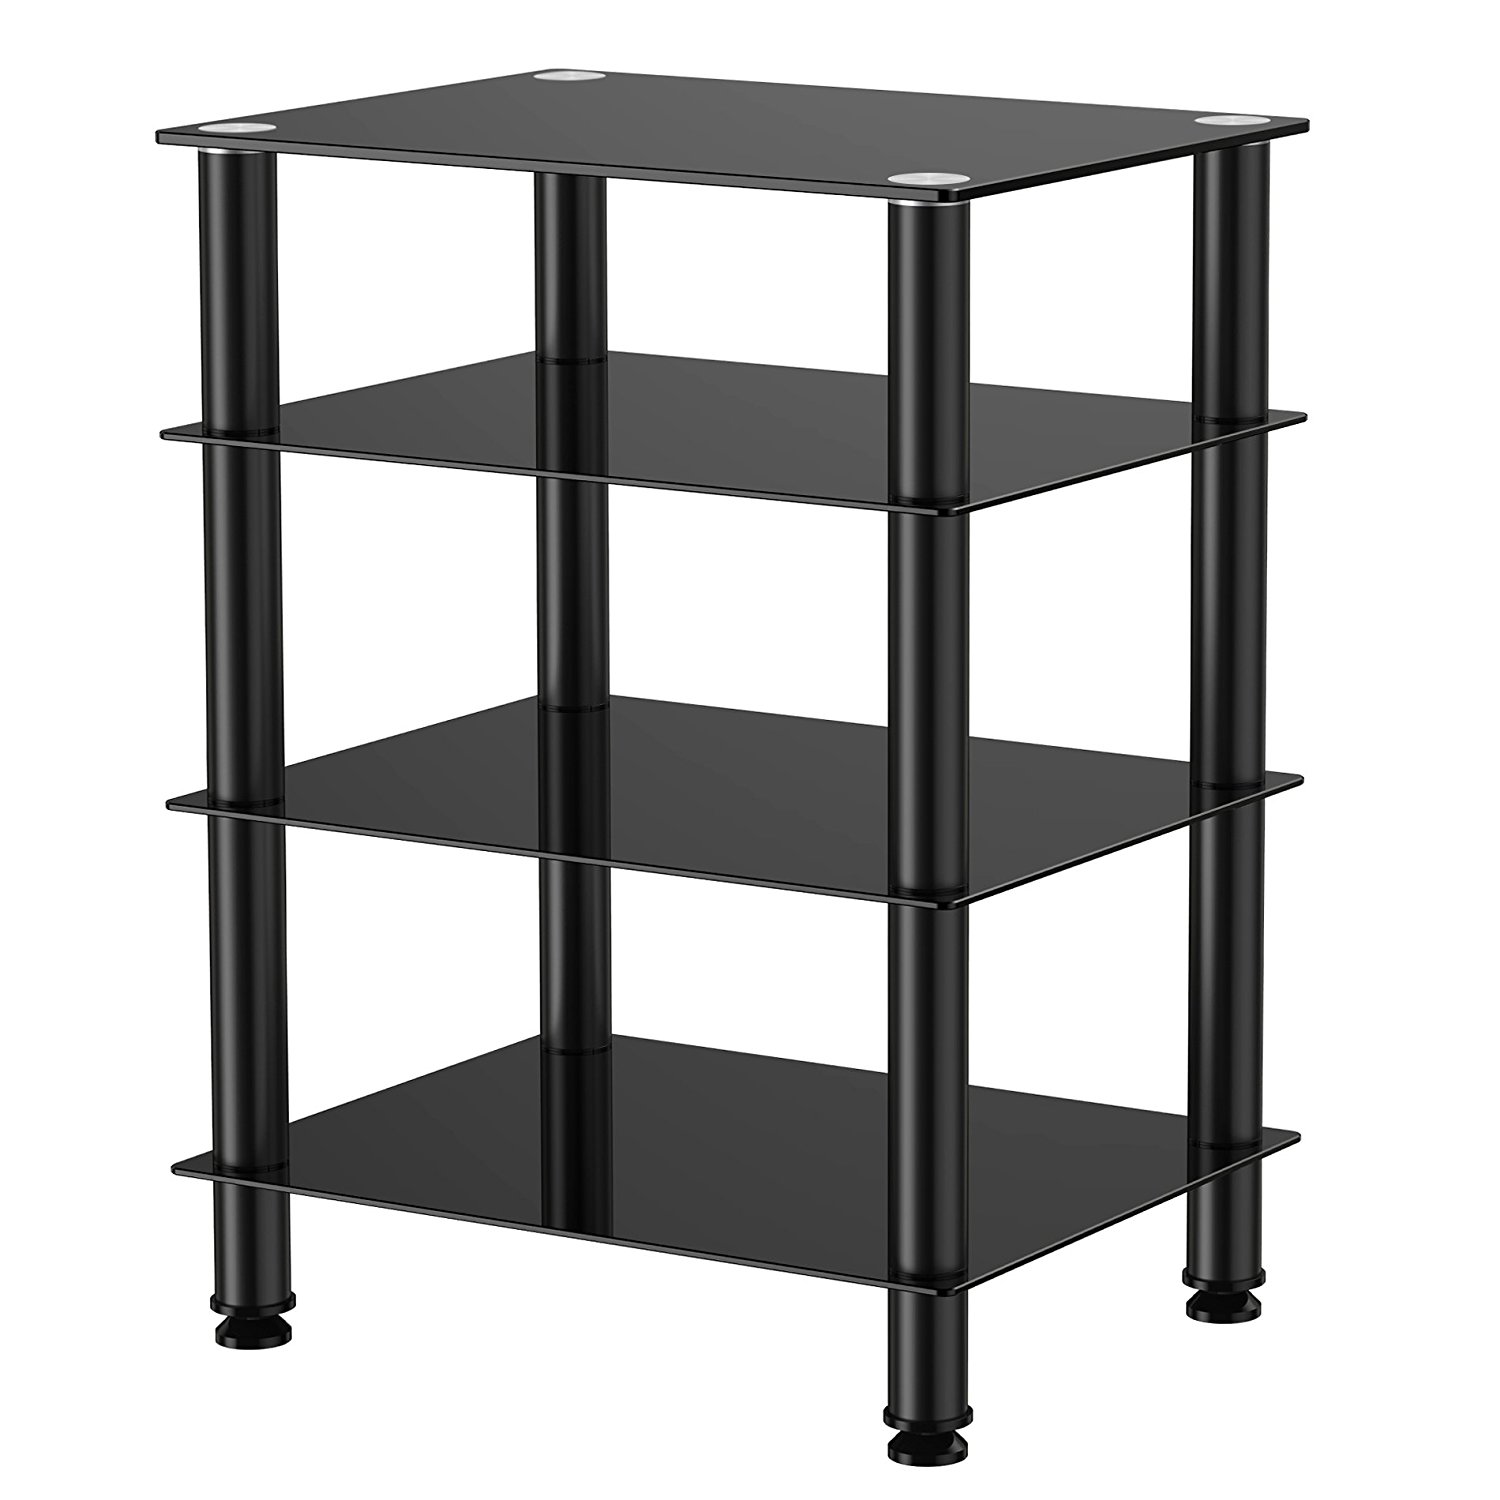 FITUEYES AV shelf Media Component TV Stand Audio Cabinet with Glass Shelf 4-tier F1AS406001GB - image 3 of 5